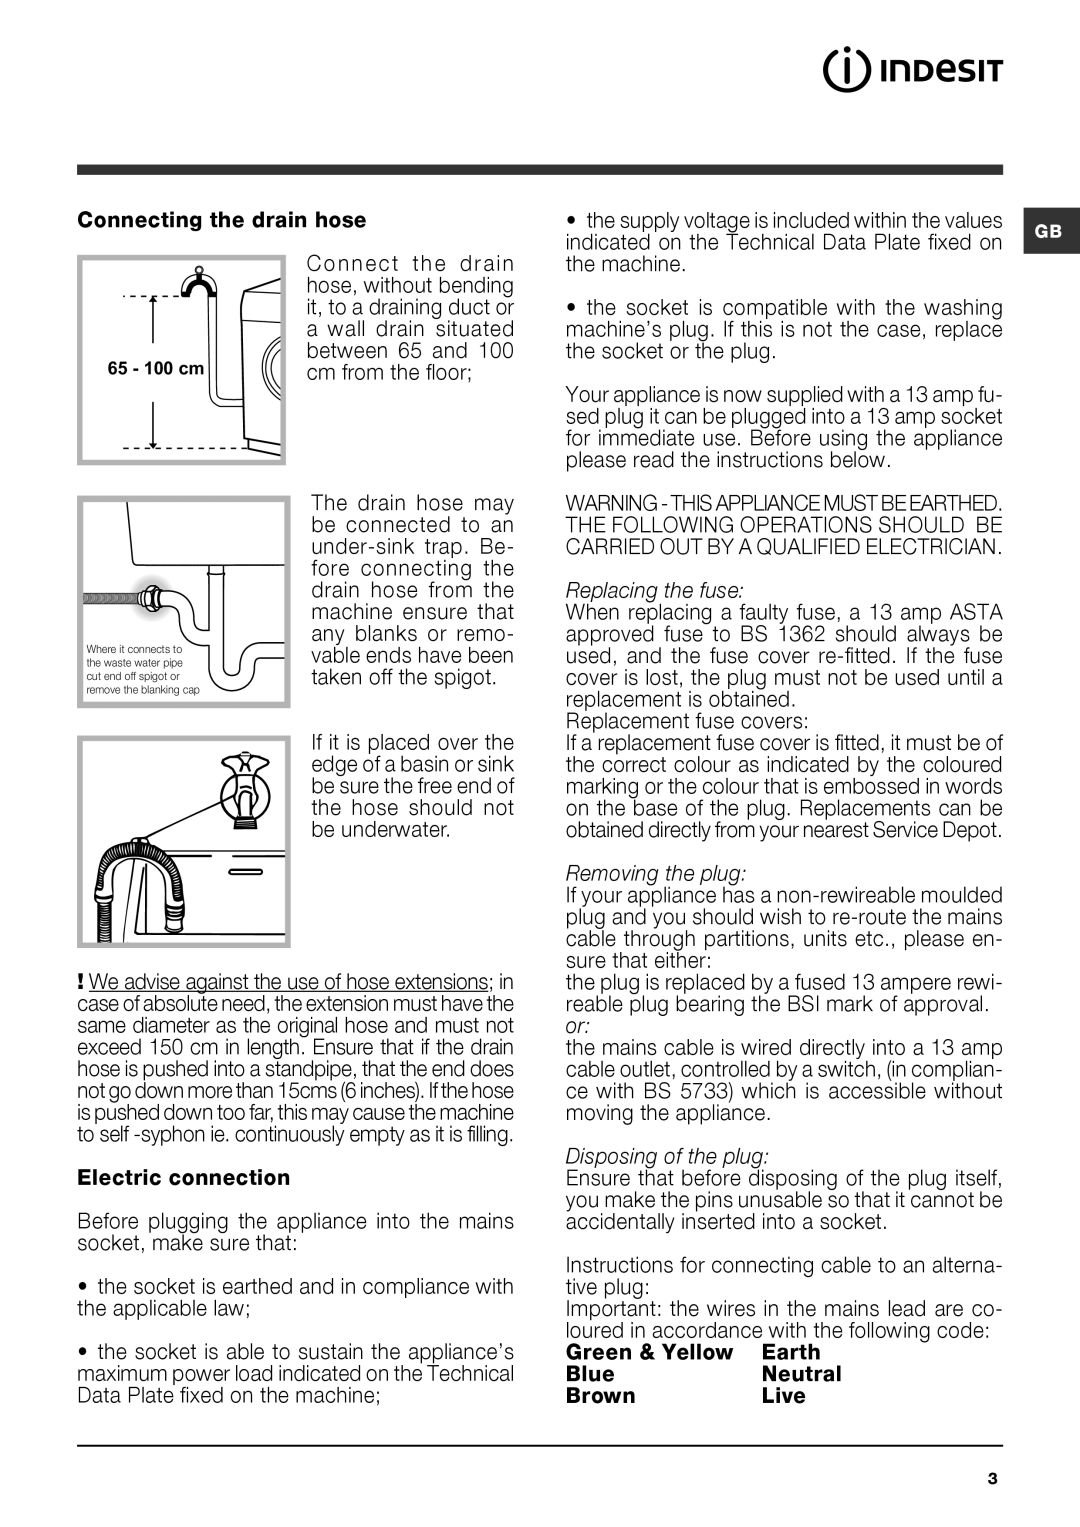 Indesit IWD 6125 manual Replacing the fuse, Removing the plug, Disposing of the plug, Connecting the drain hose 